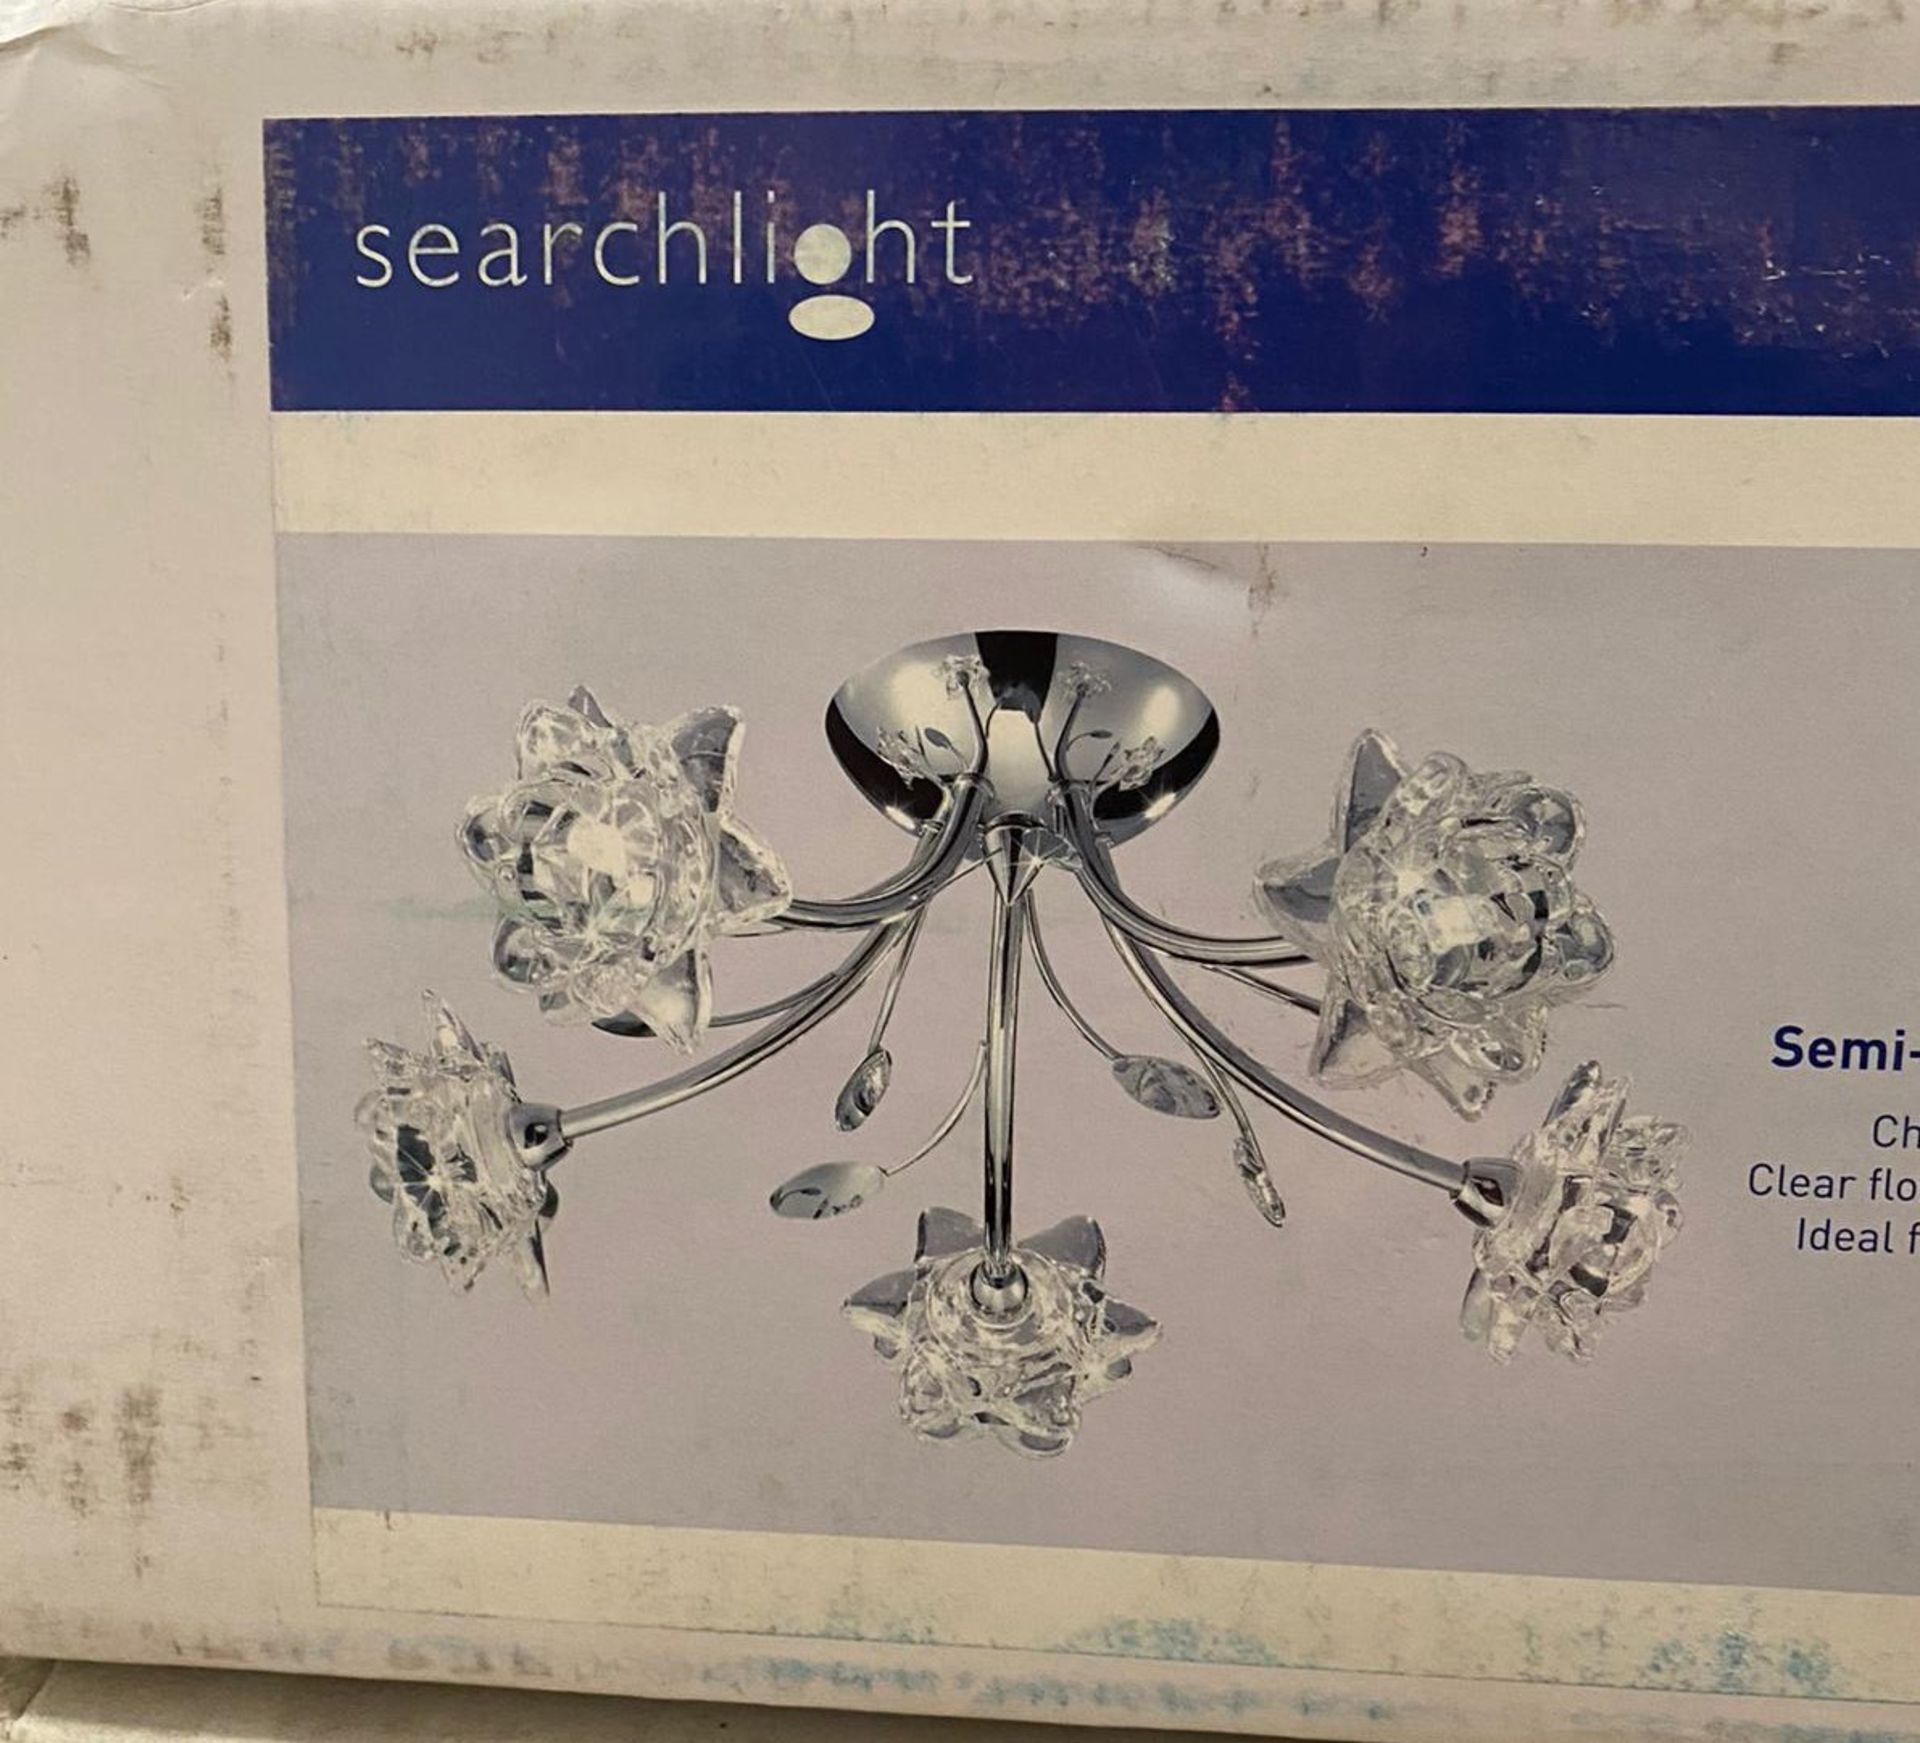 1 x Searchlight Bellis II Semi-flush fitting in chrome - Ref: 9285-5CC - New and Boxed - RRP: £100 - Image 2 of 4